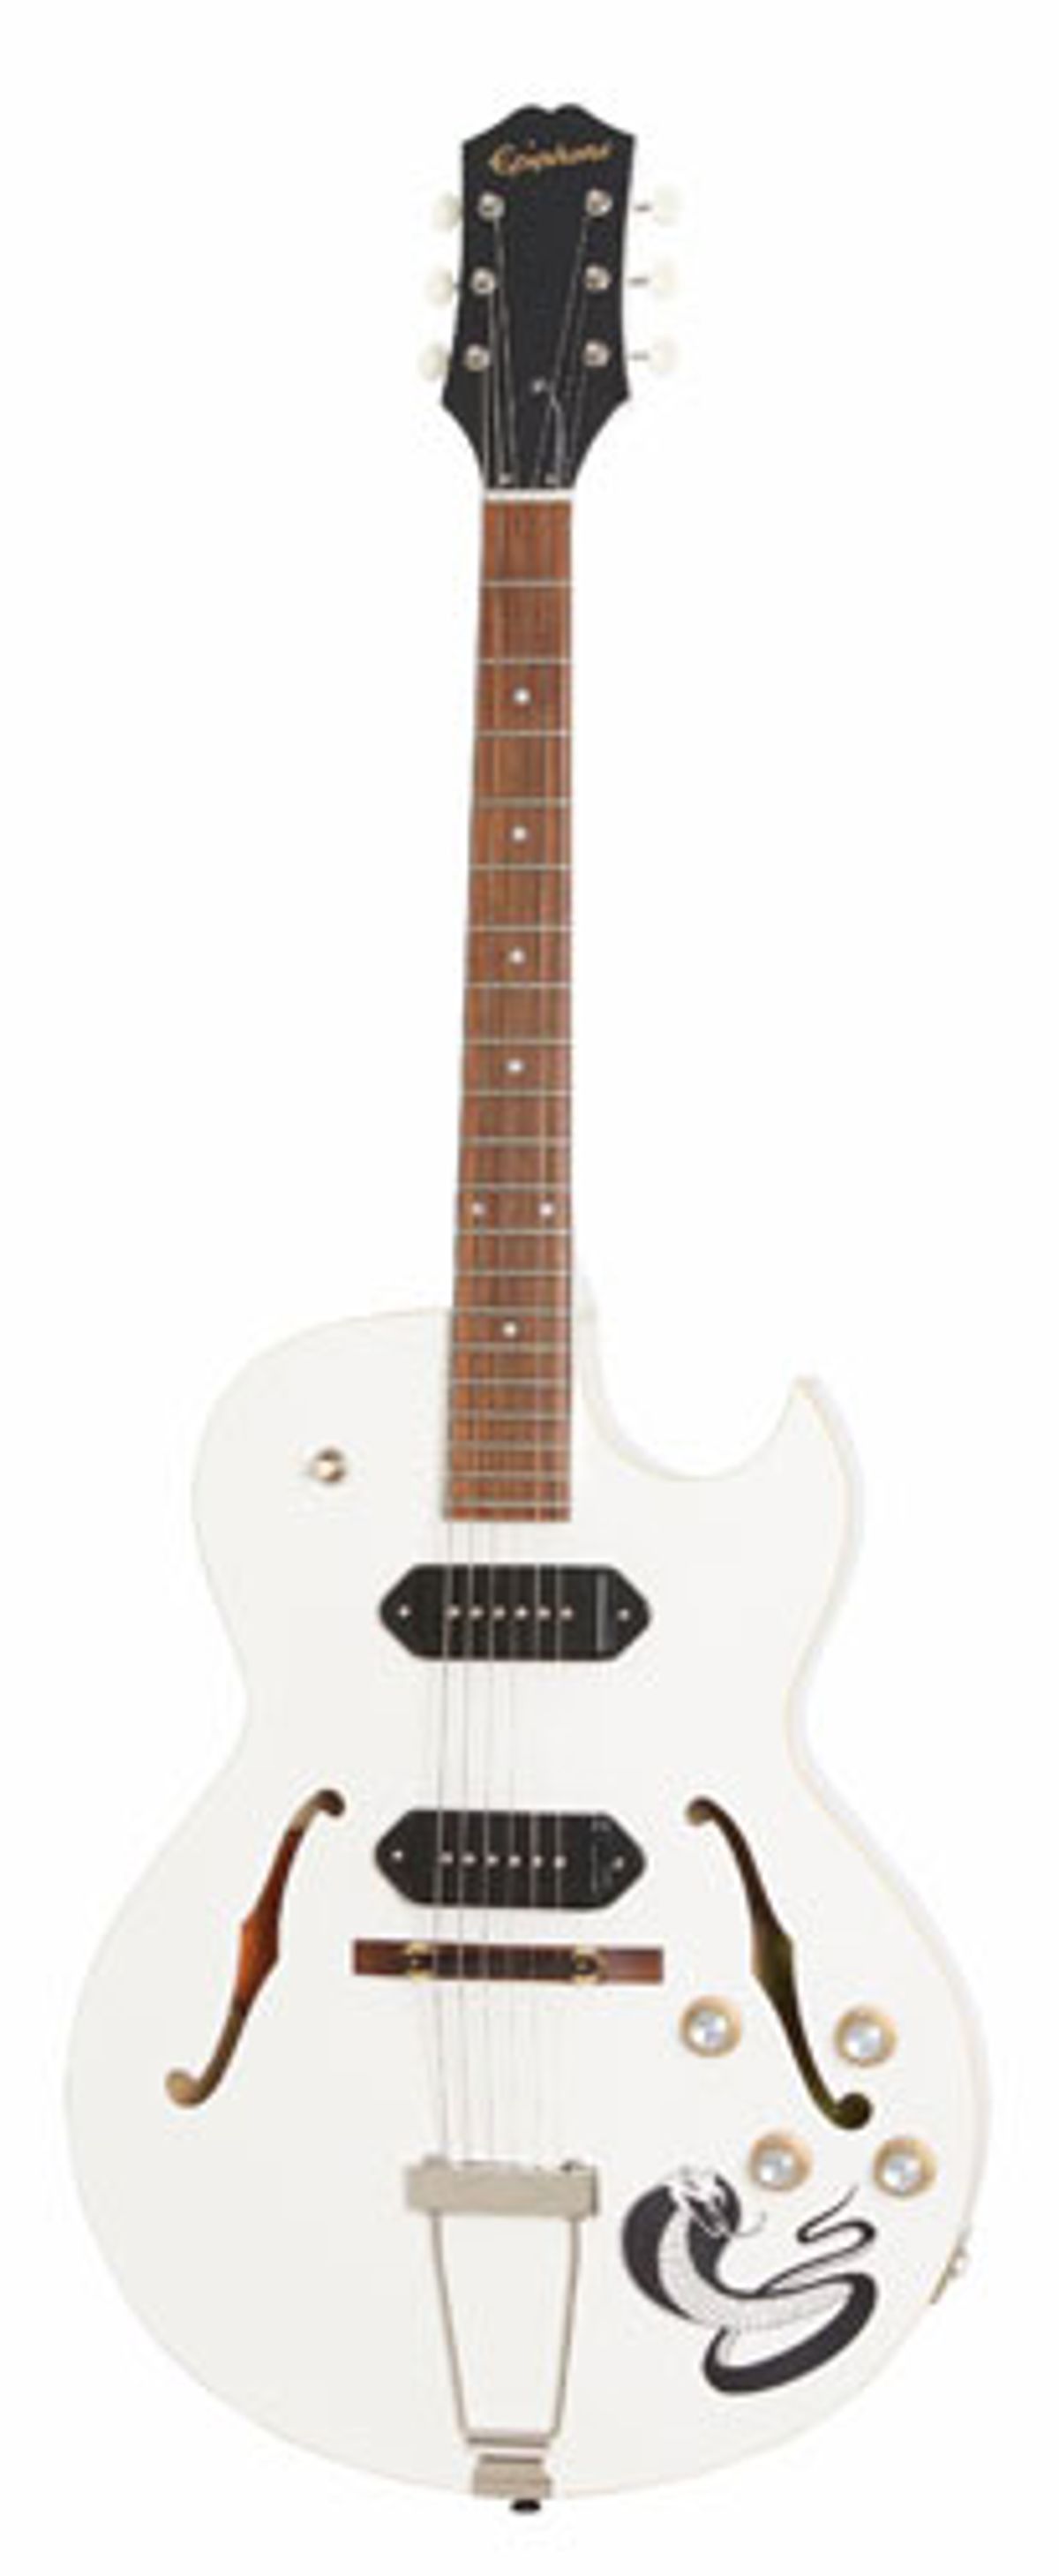 Epiphone Presents Ltd. Ed. George Thorogood White Fang ES-125TDC Outfit